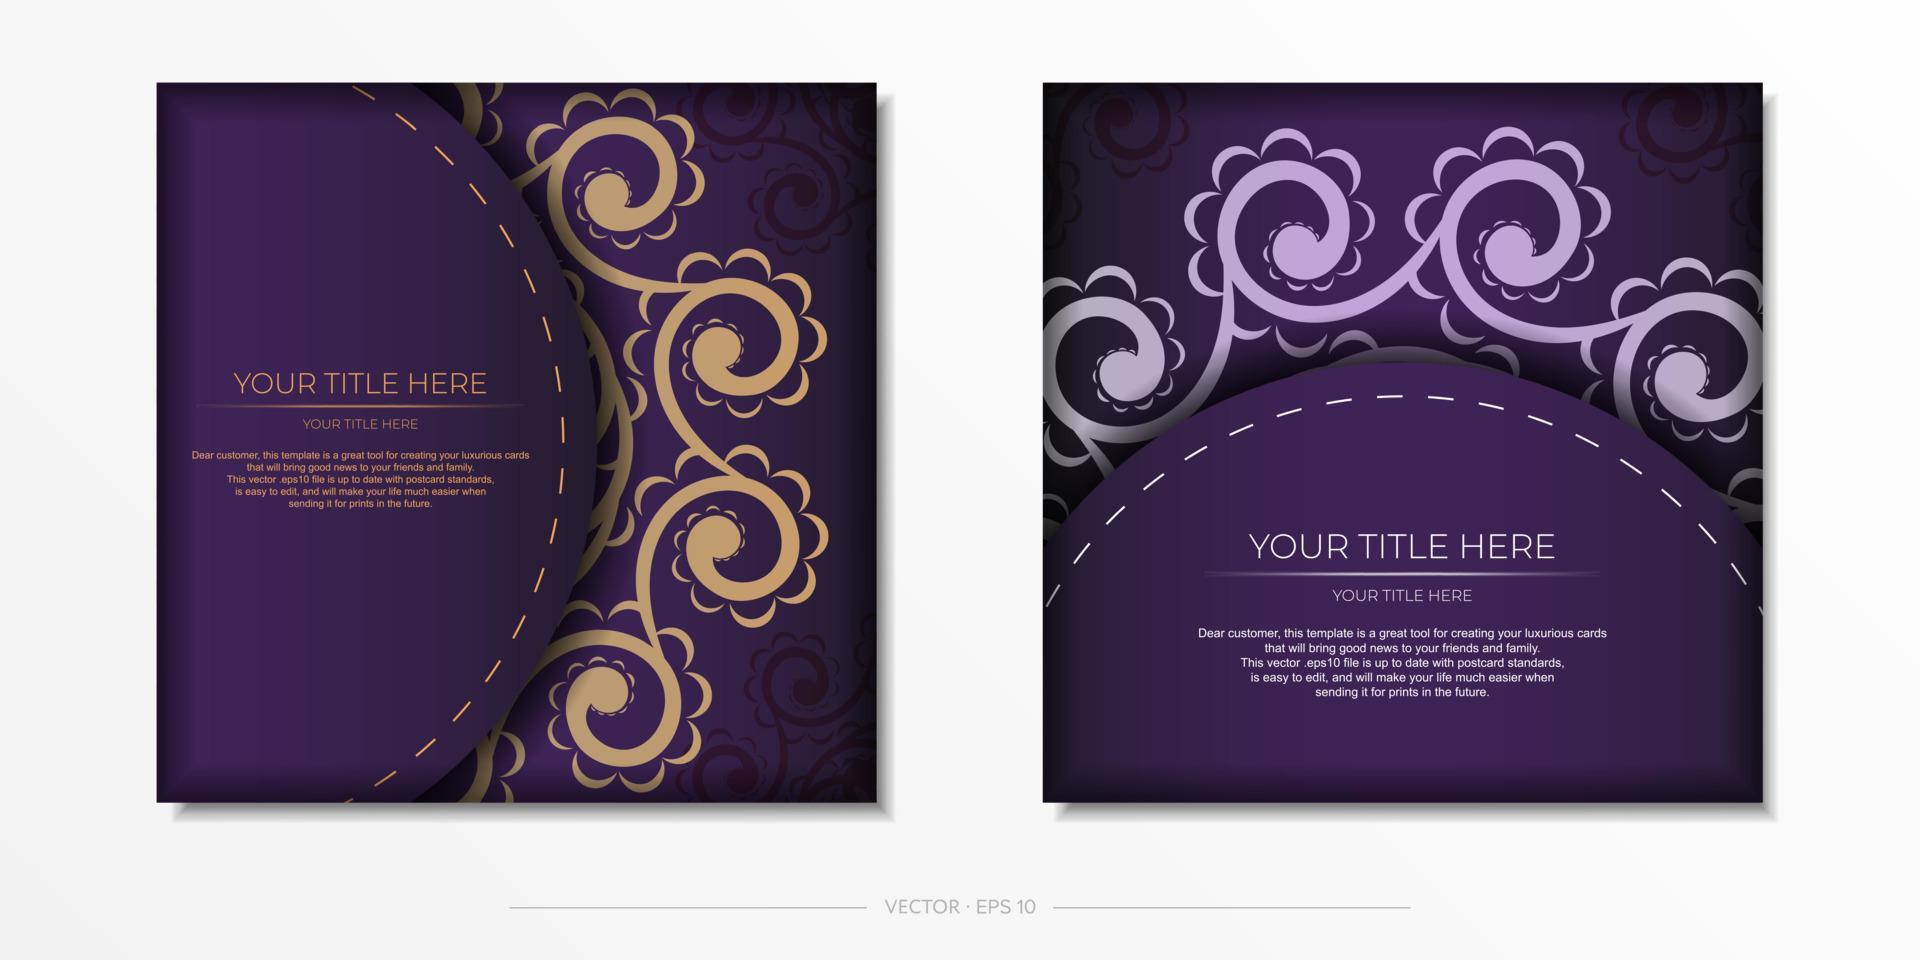 Luxurious purple postcard template with vintage abstract mandala ornament. Elegant and classic vector elements ready for print and typography.